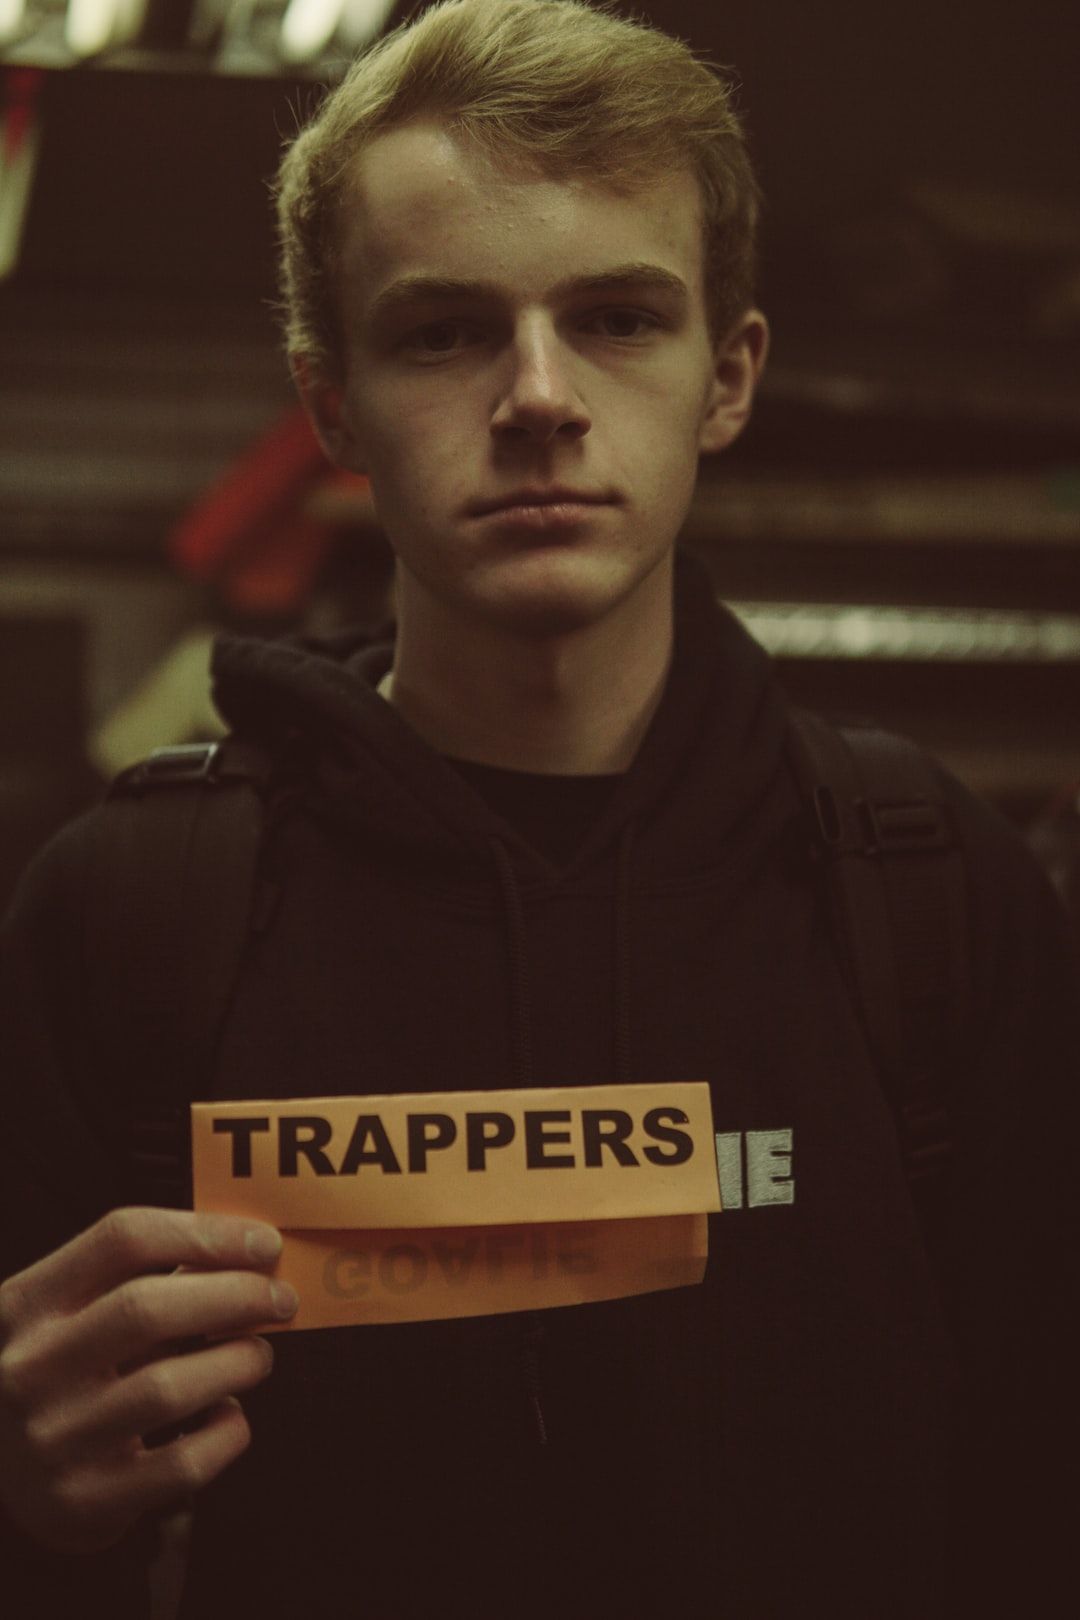 man standing and holding Trappers sign photo